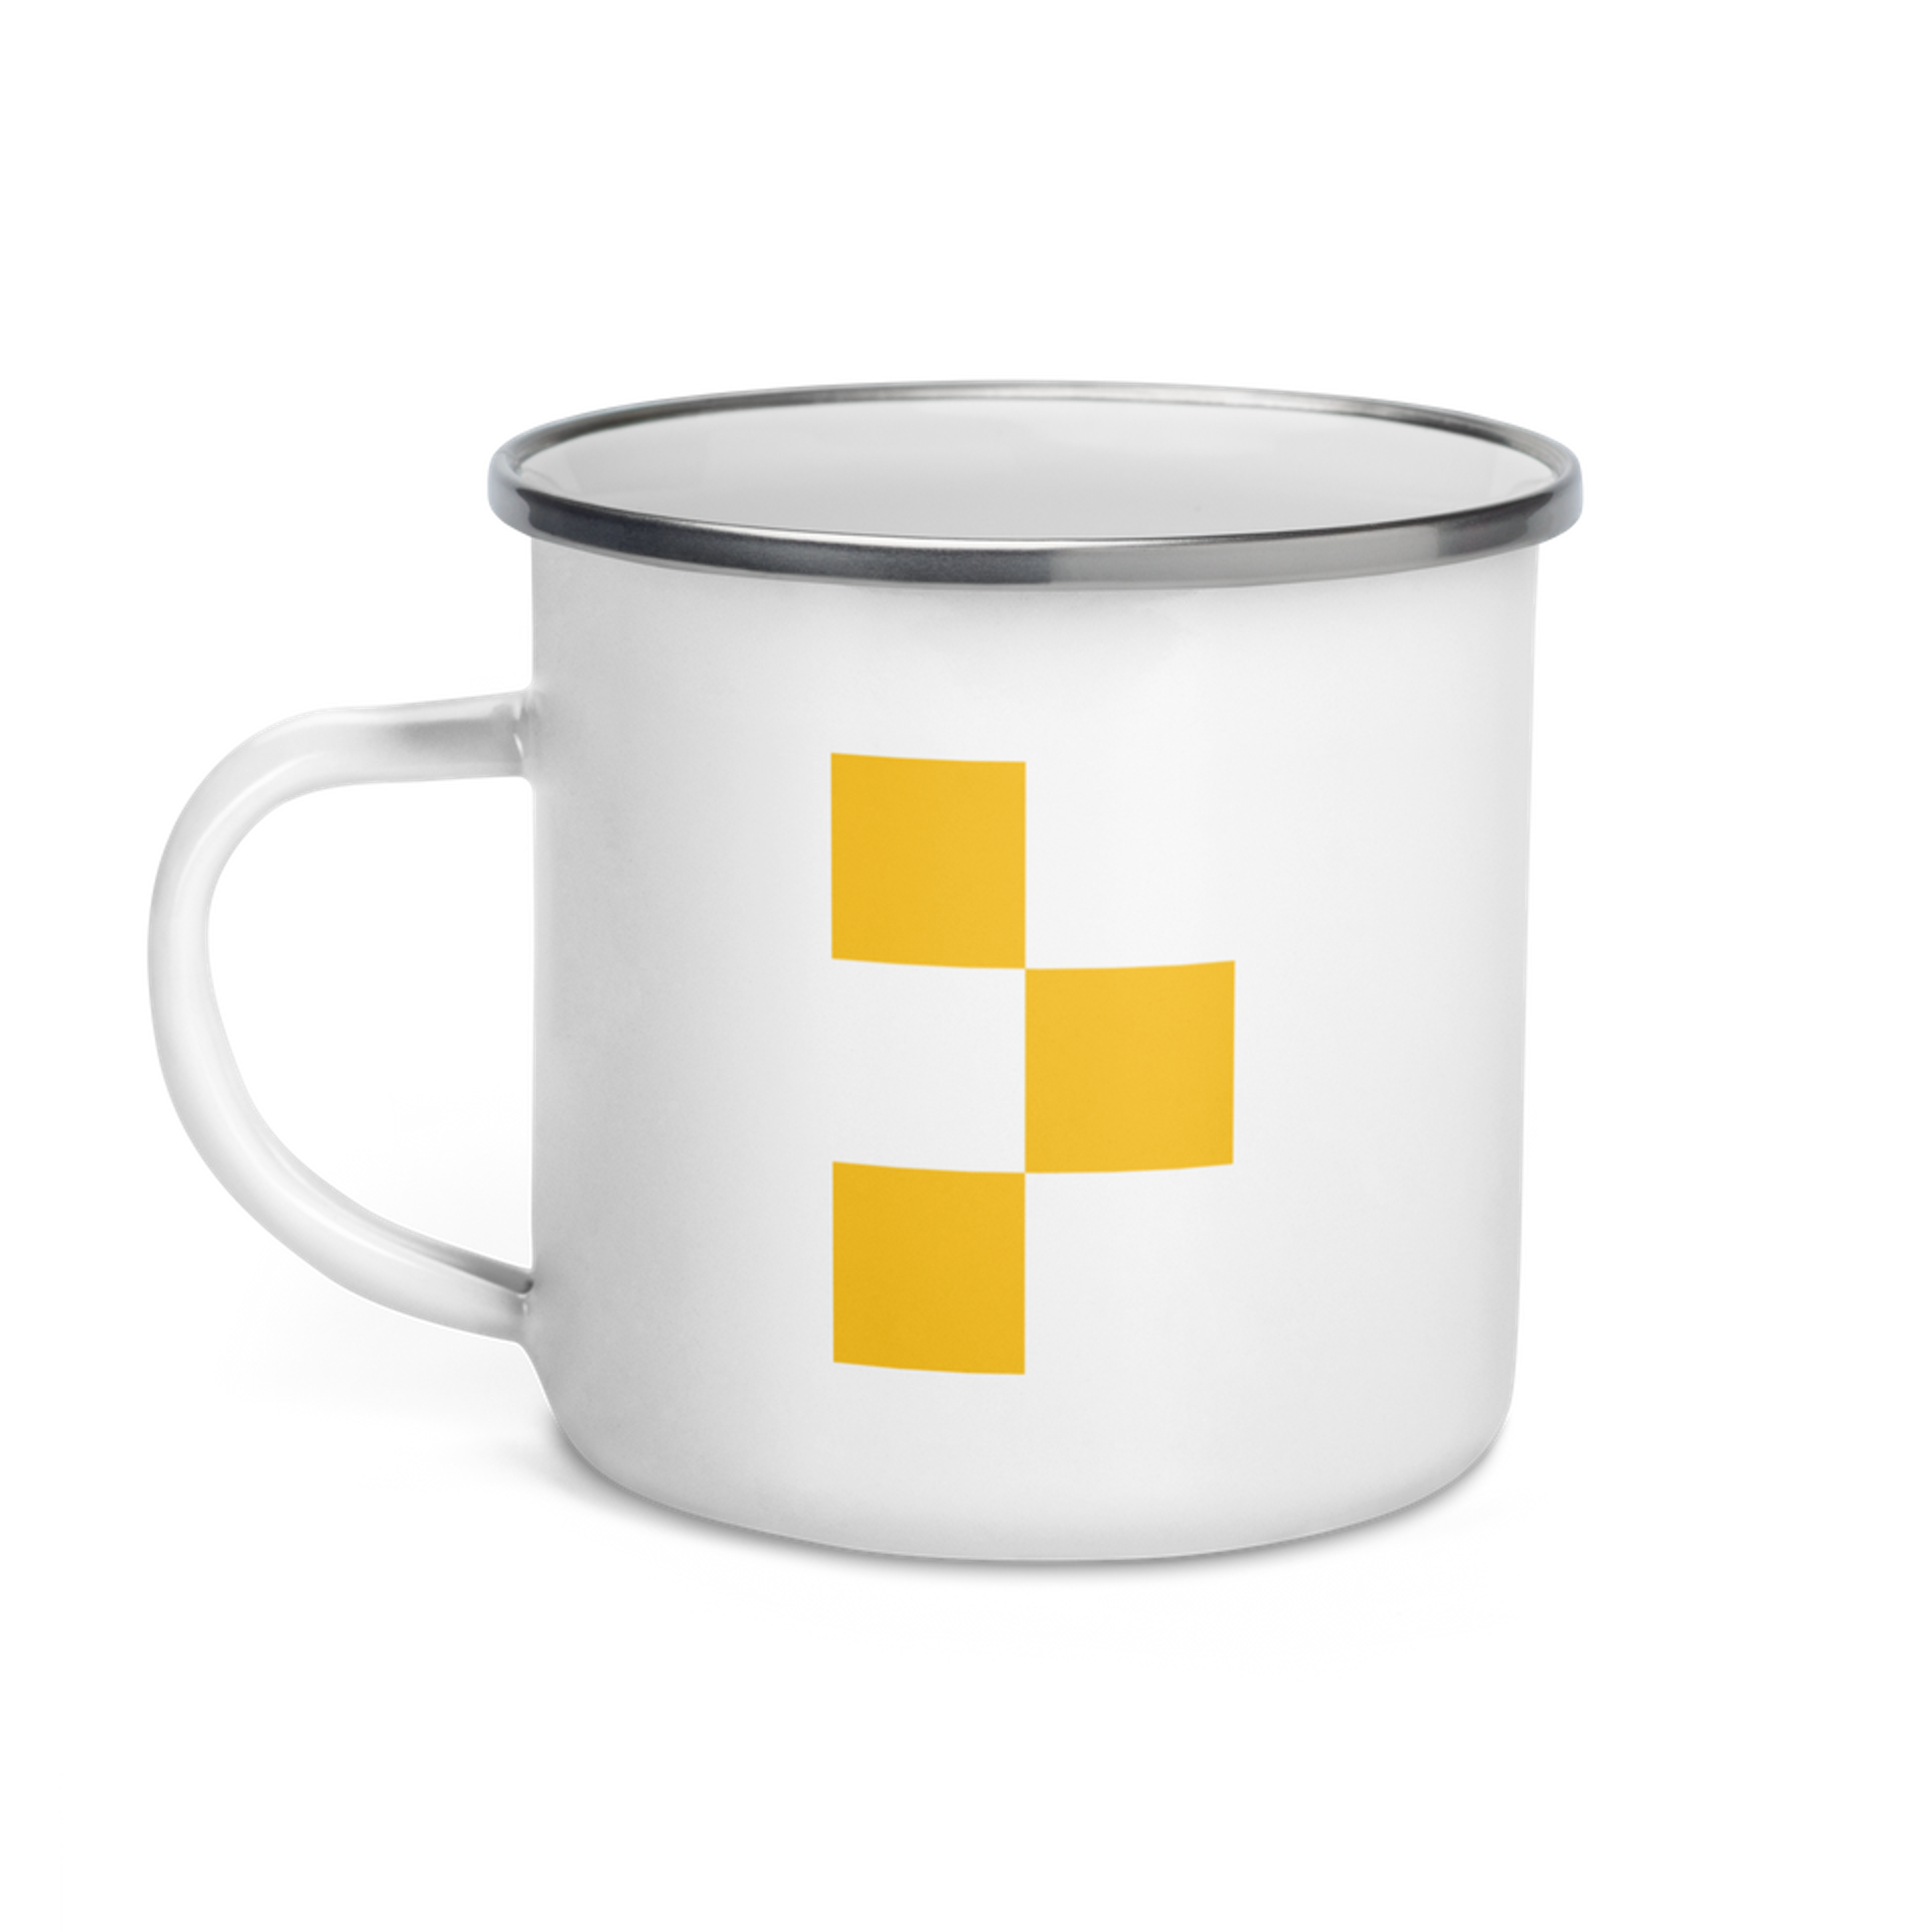 One of the mugs available in Repl shop